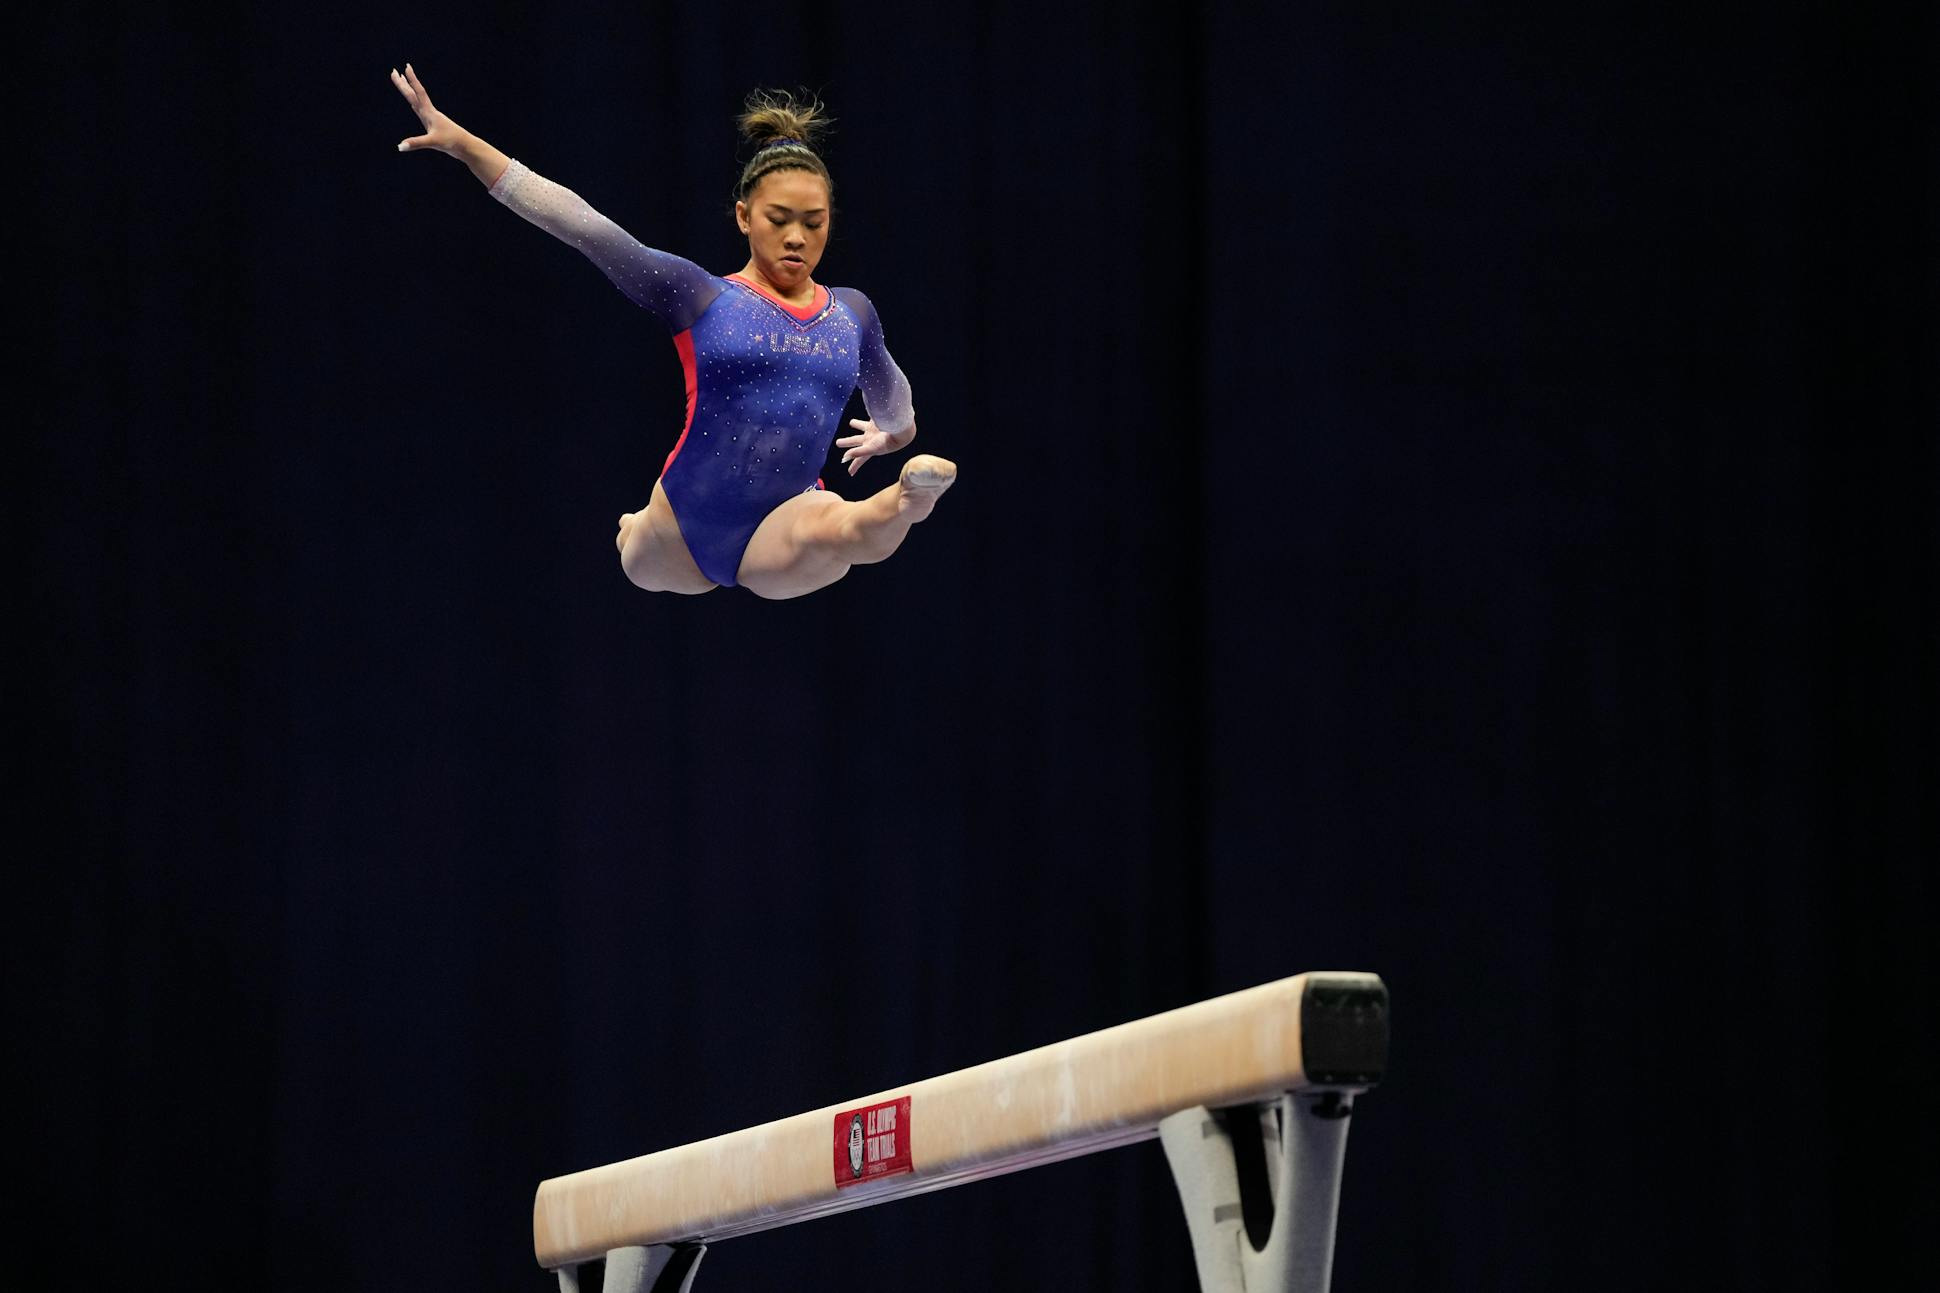 Suni Lee competes on the balance beam during the U.S. Olympic Gymnastics Trials on June 25 in in St. Louis.